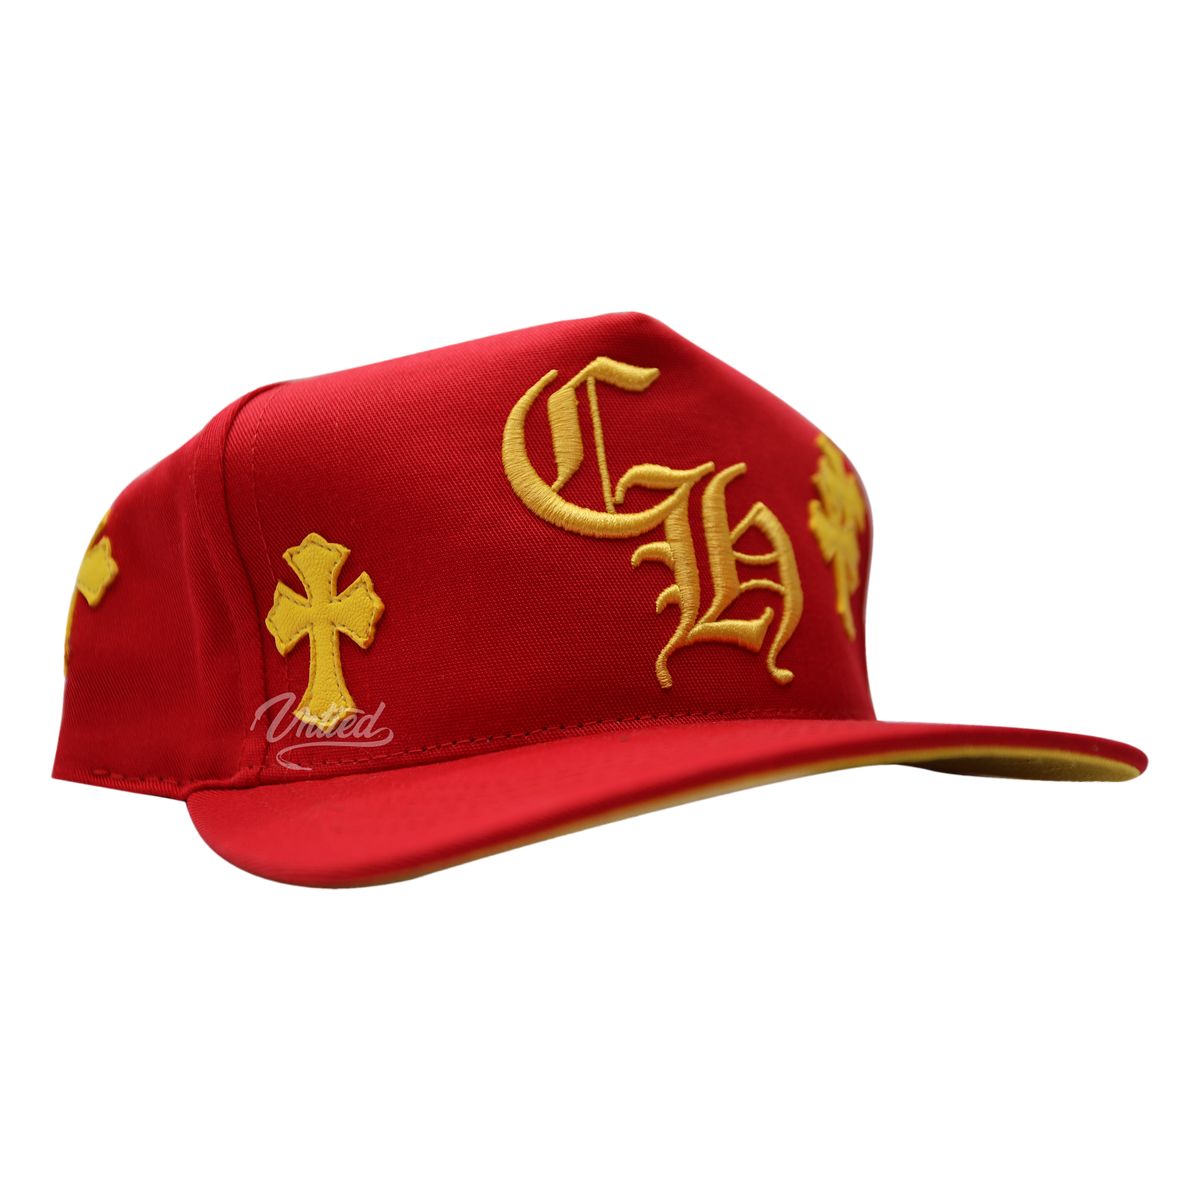 Chrome Hearts Cross Patch Baseball Hat "Red/Yellow"